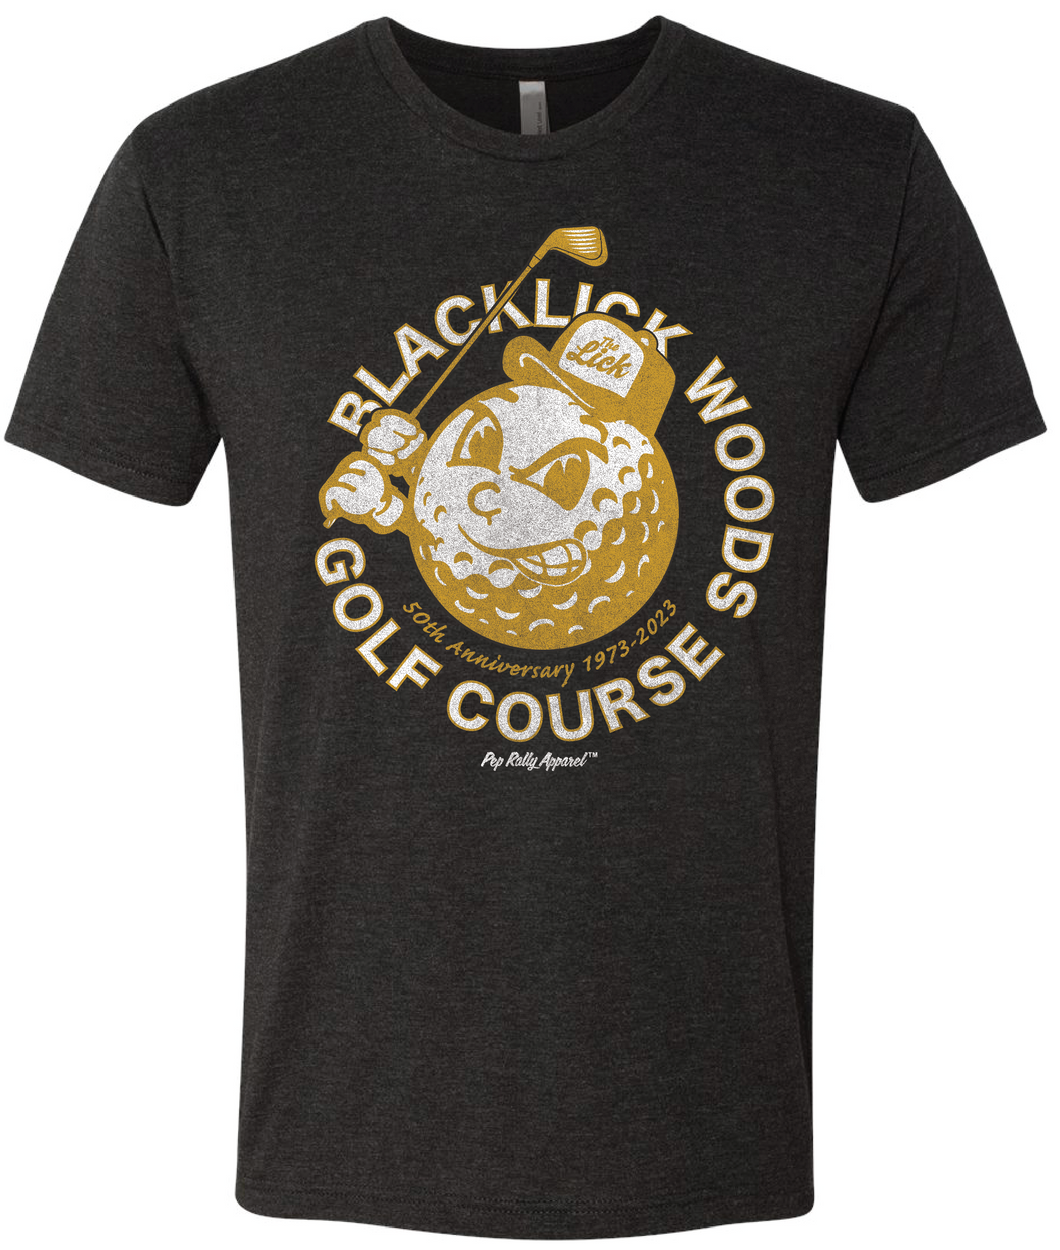 BLACKLICK WOODS GOLF COURSE 50TH ANNIVERSARY TEE